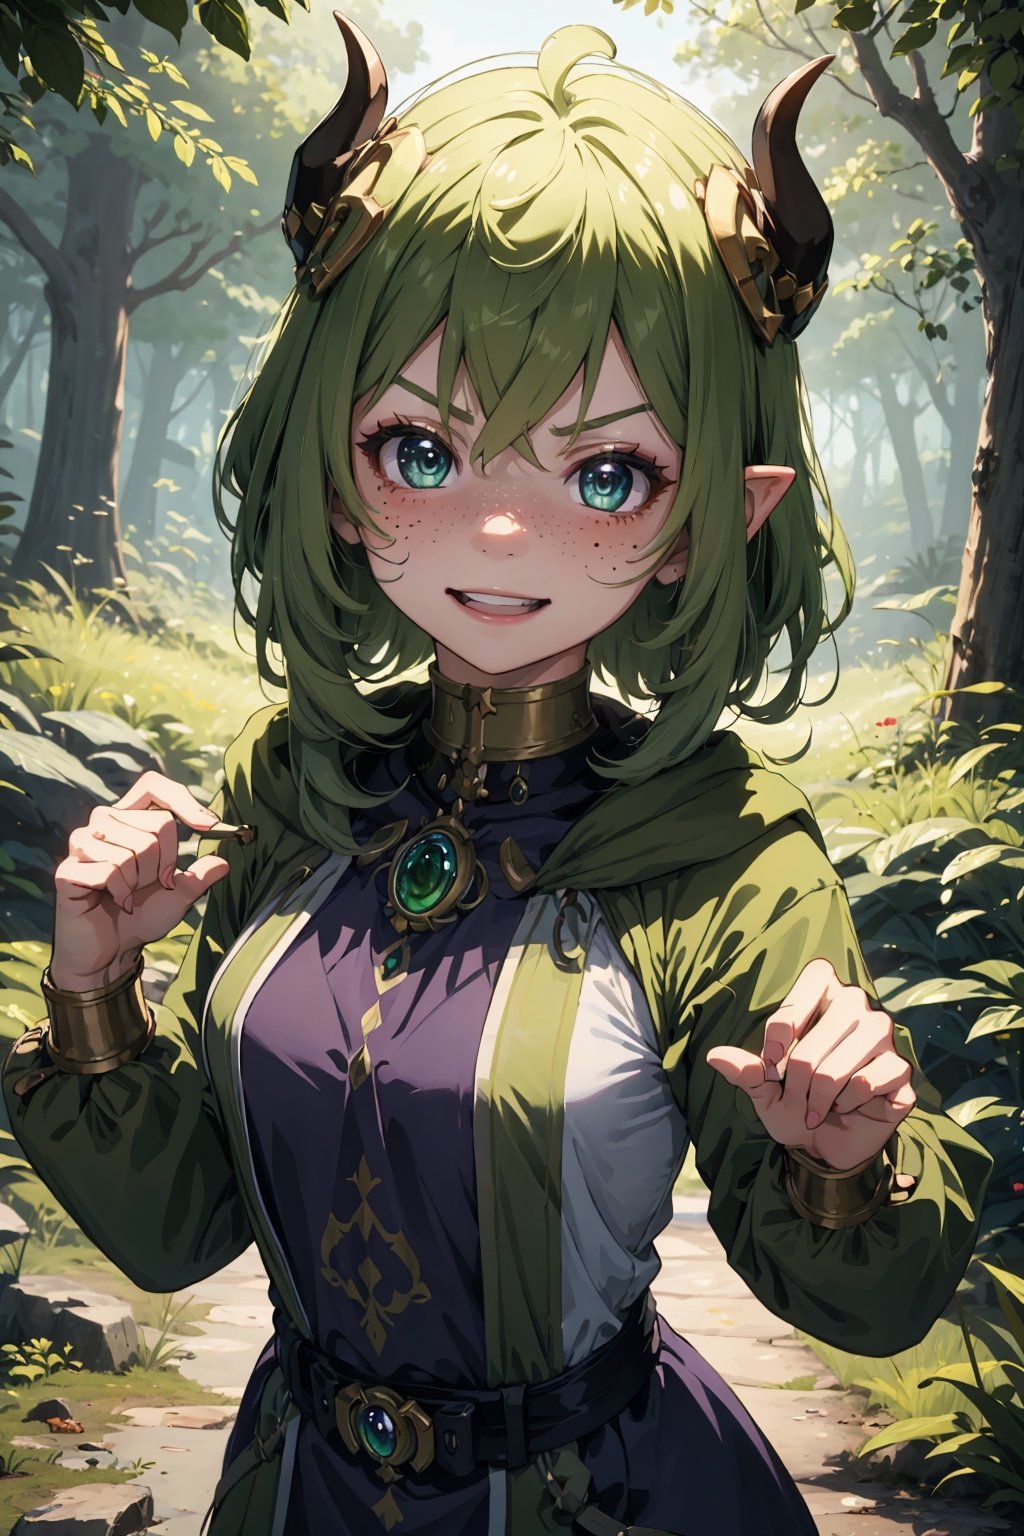 Imagine a female child with short messy vibrant purple hair in a short hair cut. She has small breasts. She has bright green eyes. She has pointed elf ears. She has two short horns on her head. She has a scheming smile. angry eyebrows. big smile. dragon eyes. She has warm freckles on her face. She wears a long green trench coat. The background is a charming forest path in the enchanted woods with bright lighting, creating a magical ambiance. This artwork captures the essence of mischief and magic against the backdrop of a beautiful setting. detailed, detail_eyes, detailed_hair, detailed_scenario, detailed_hands, detailed_background, flat chest,